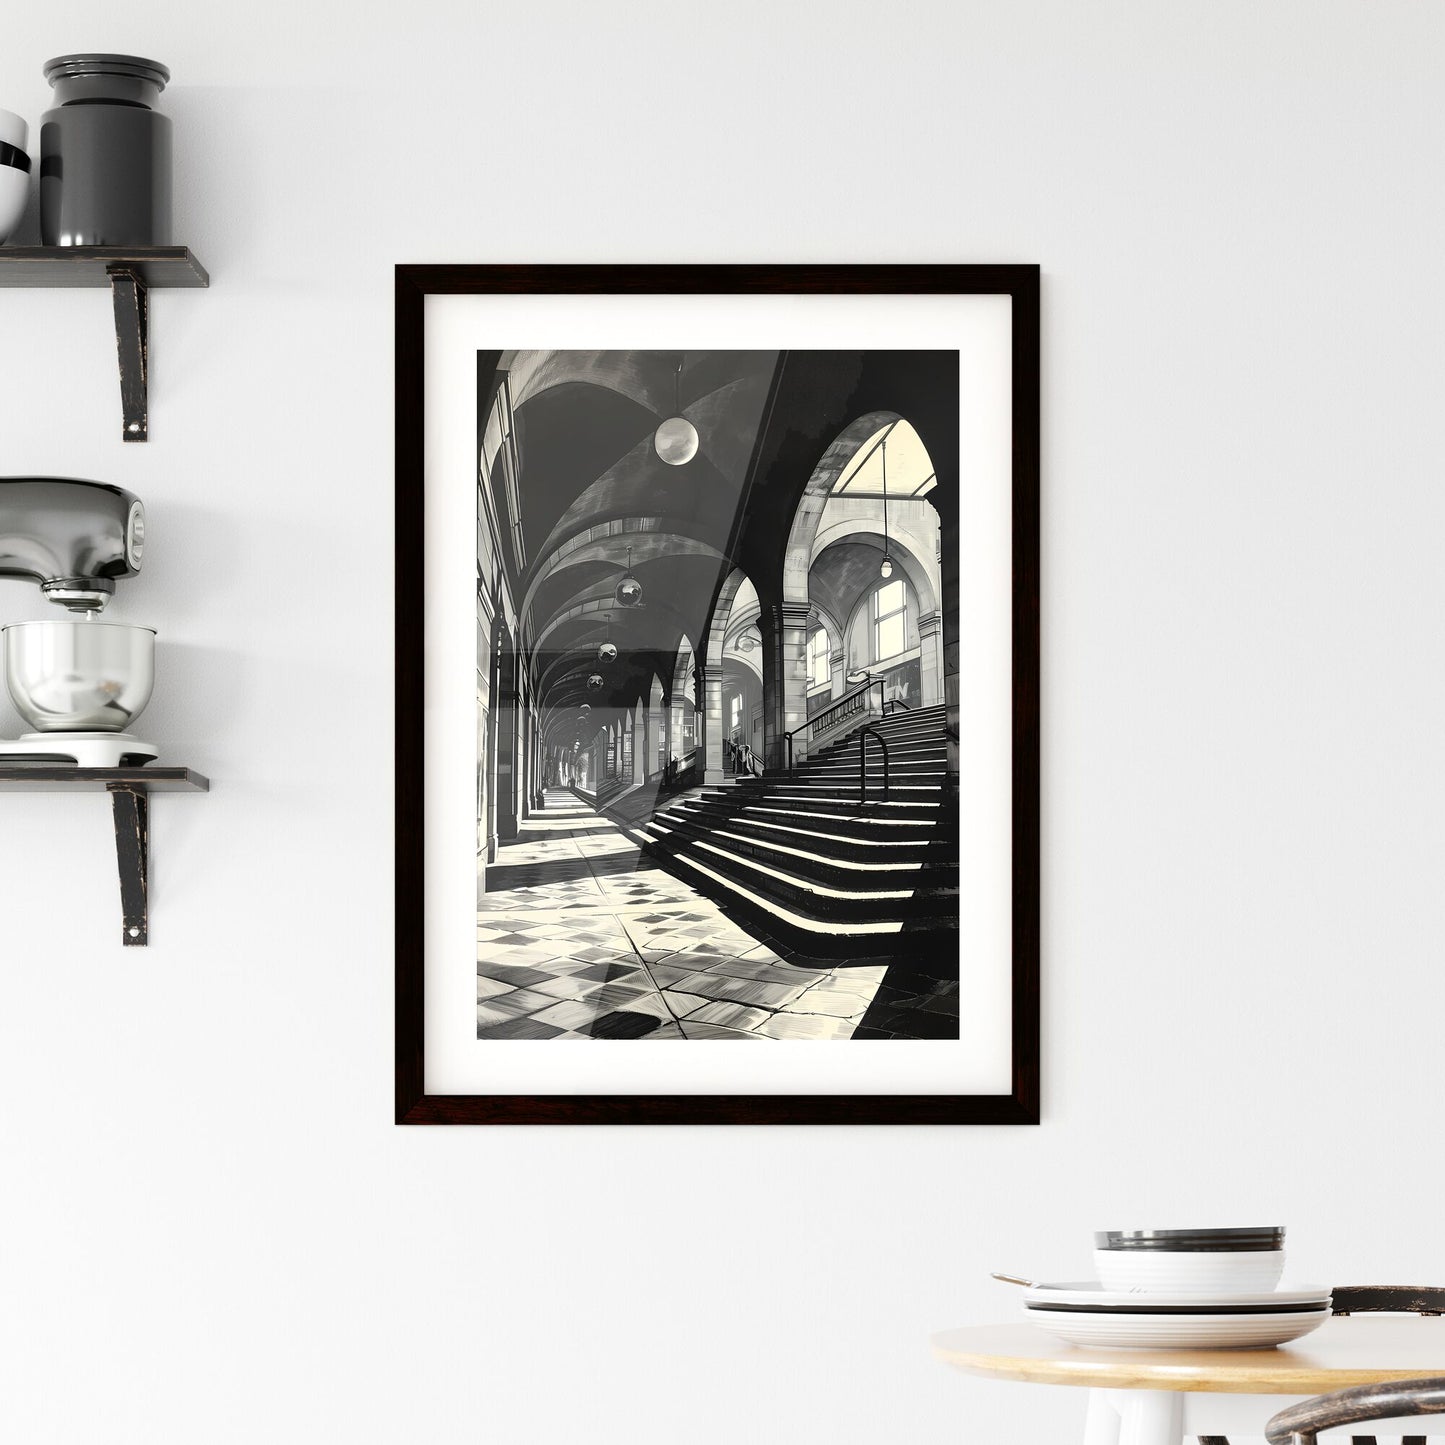 A Poster of art deco minimalism - A Black And White Photo Of A Building With A Staircase Default Title